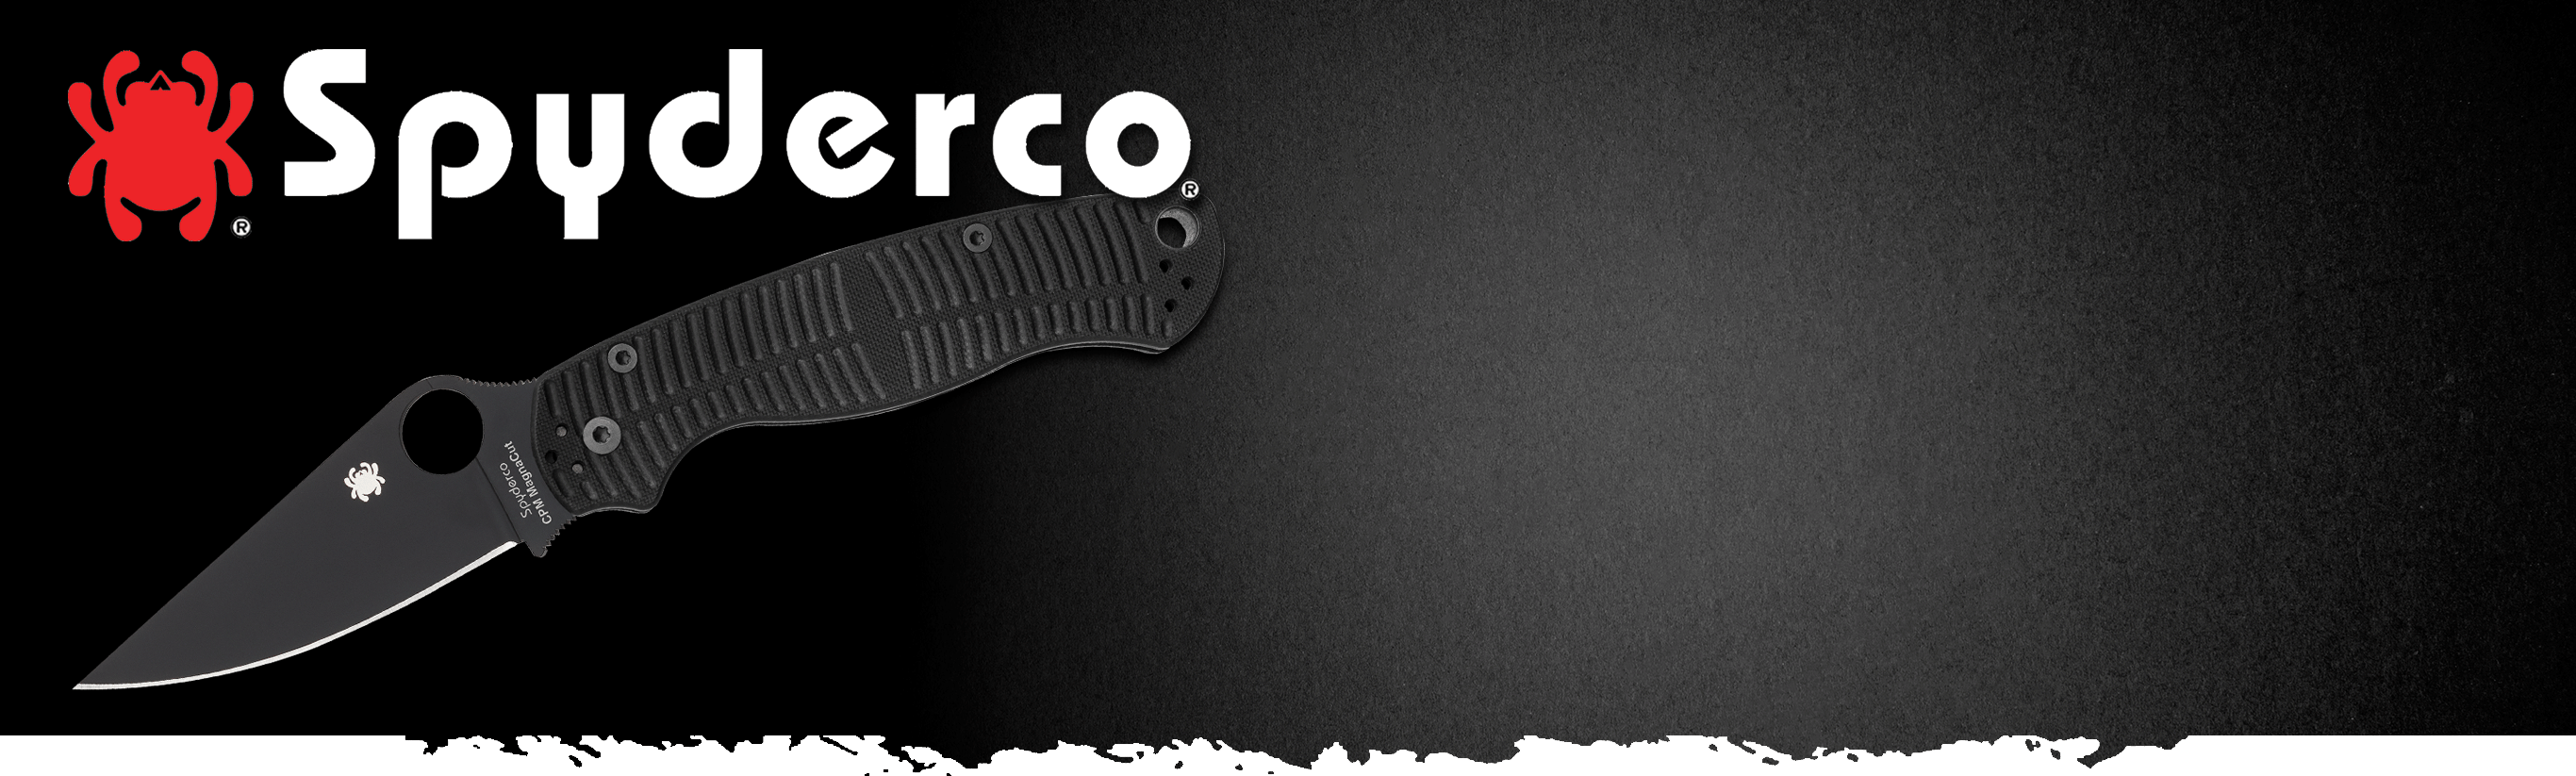 Spyderco Father's Day Sale 25% Off All In-Stock Spyderco